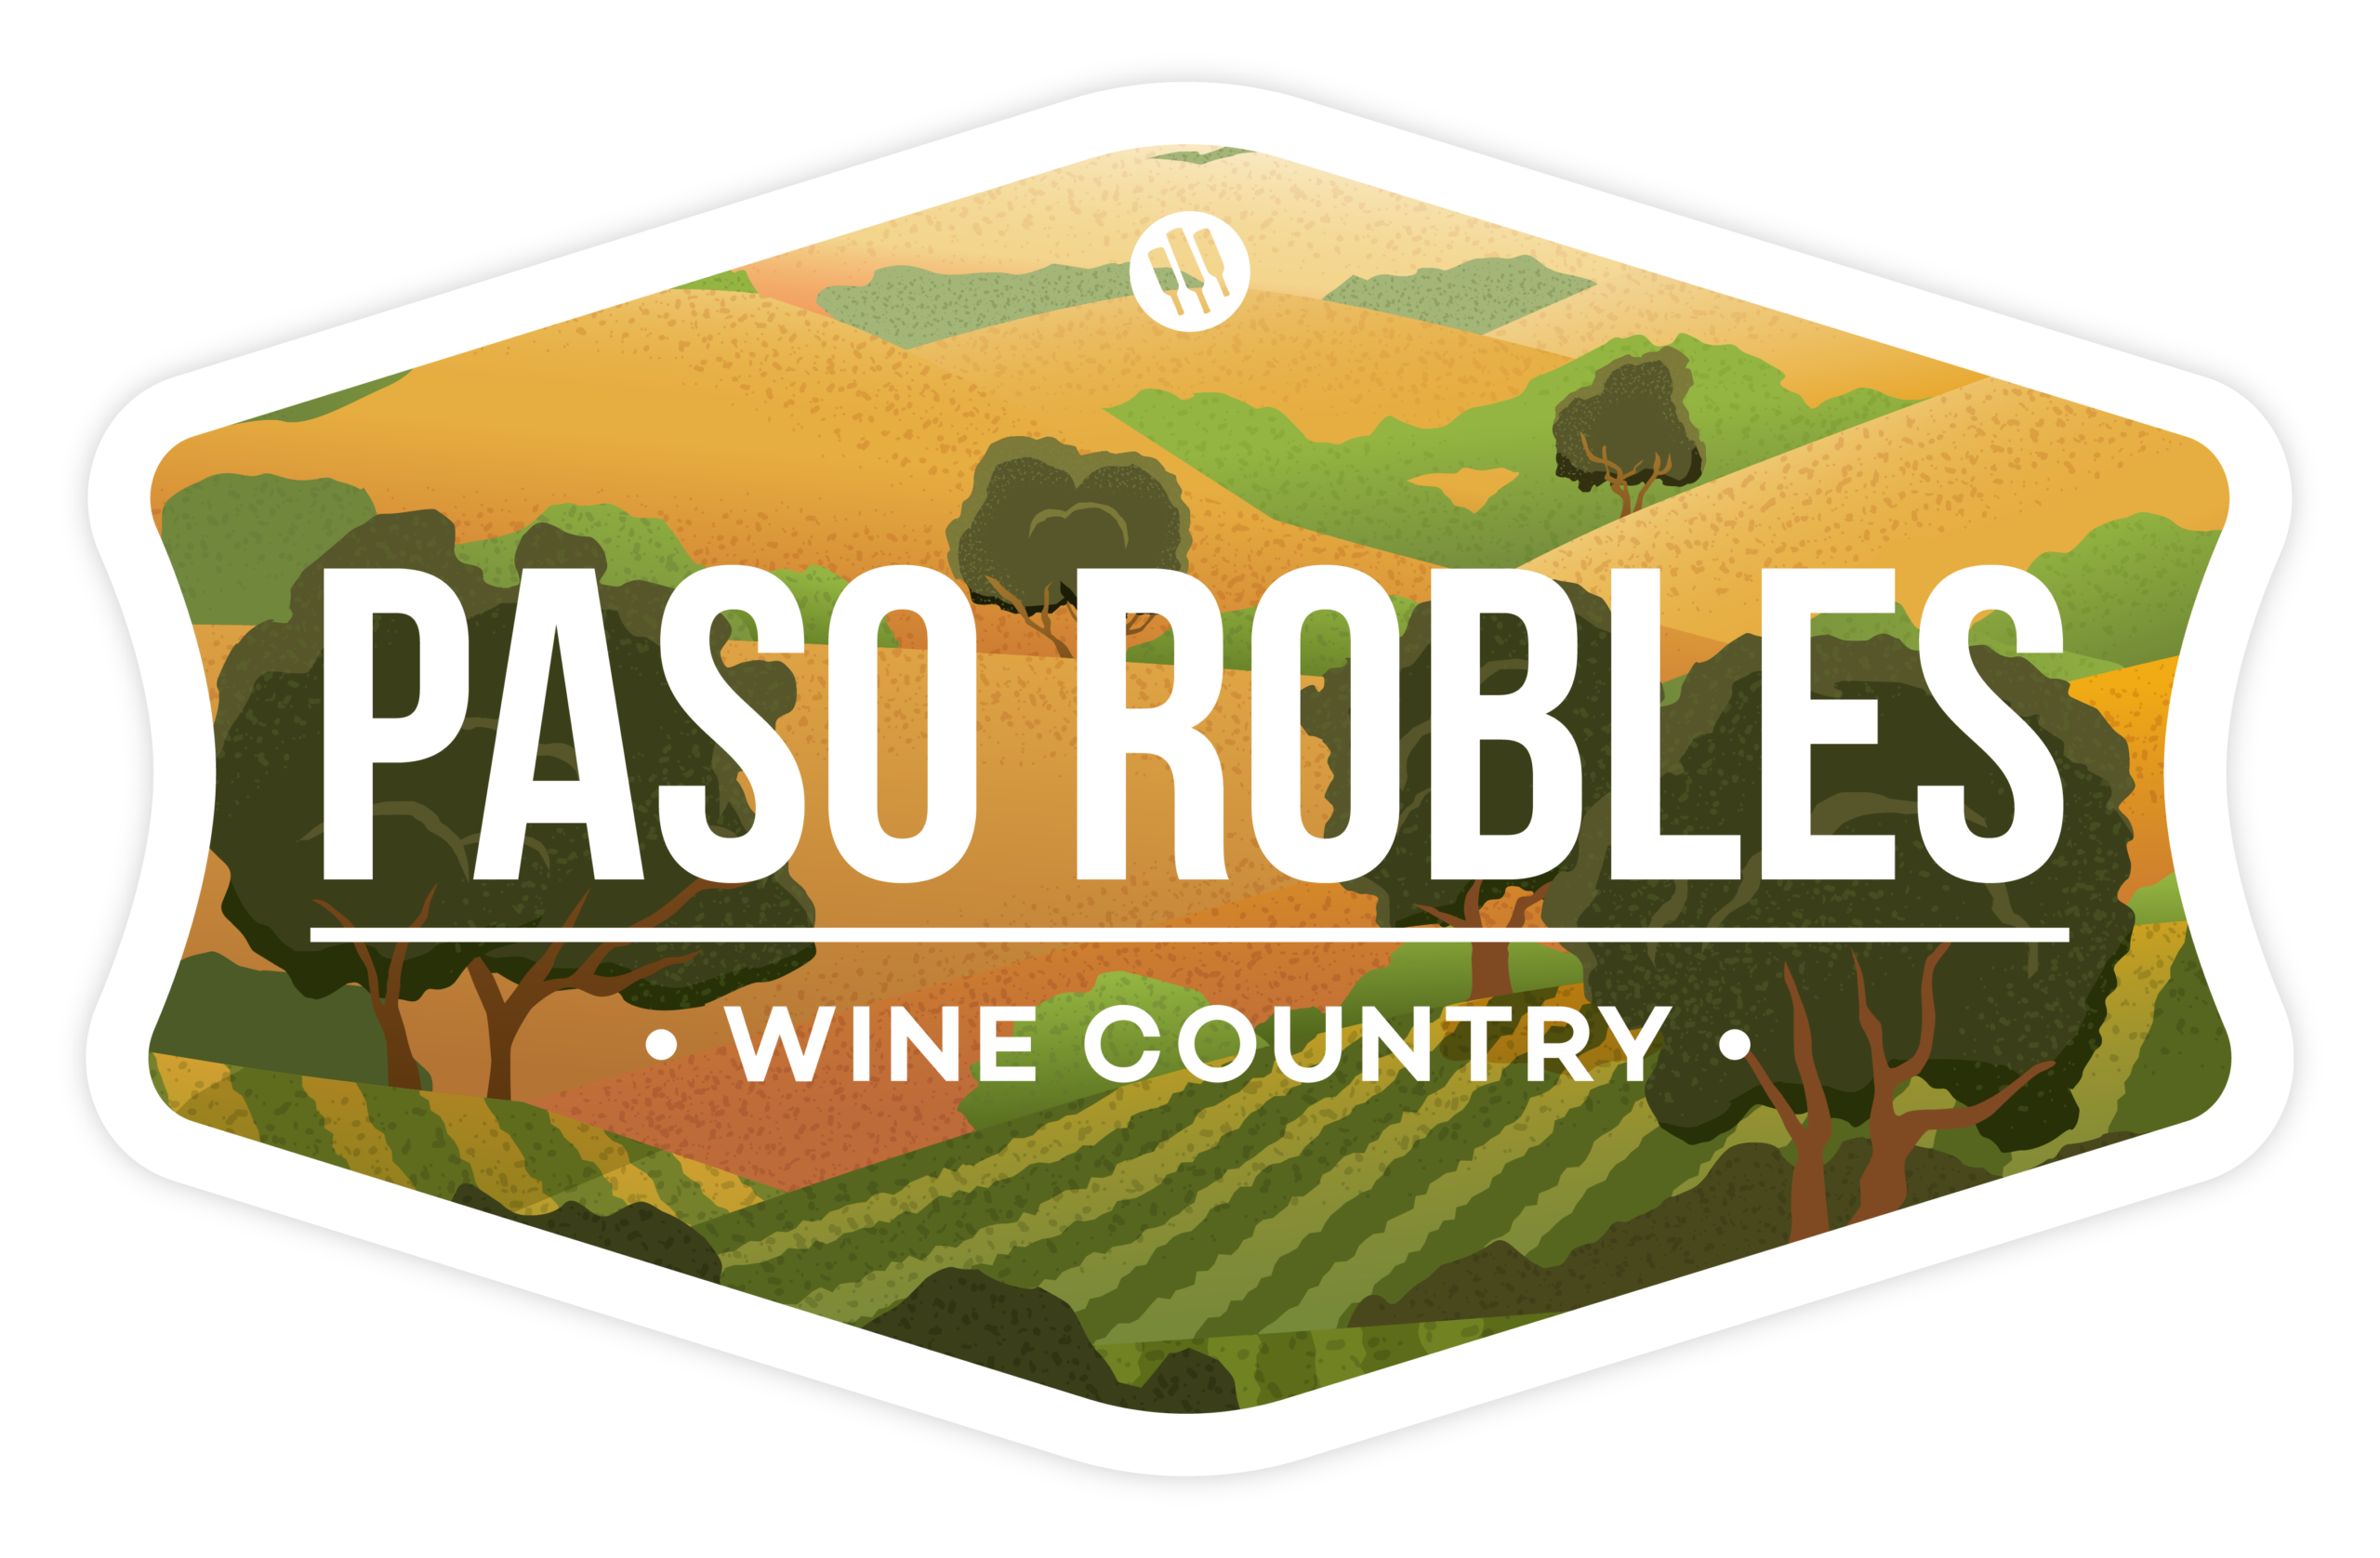 Everything You Need To Know About Wine in Paso Robles